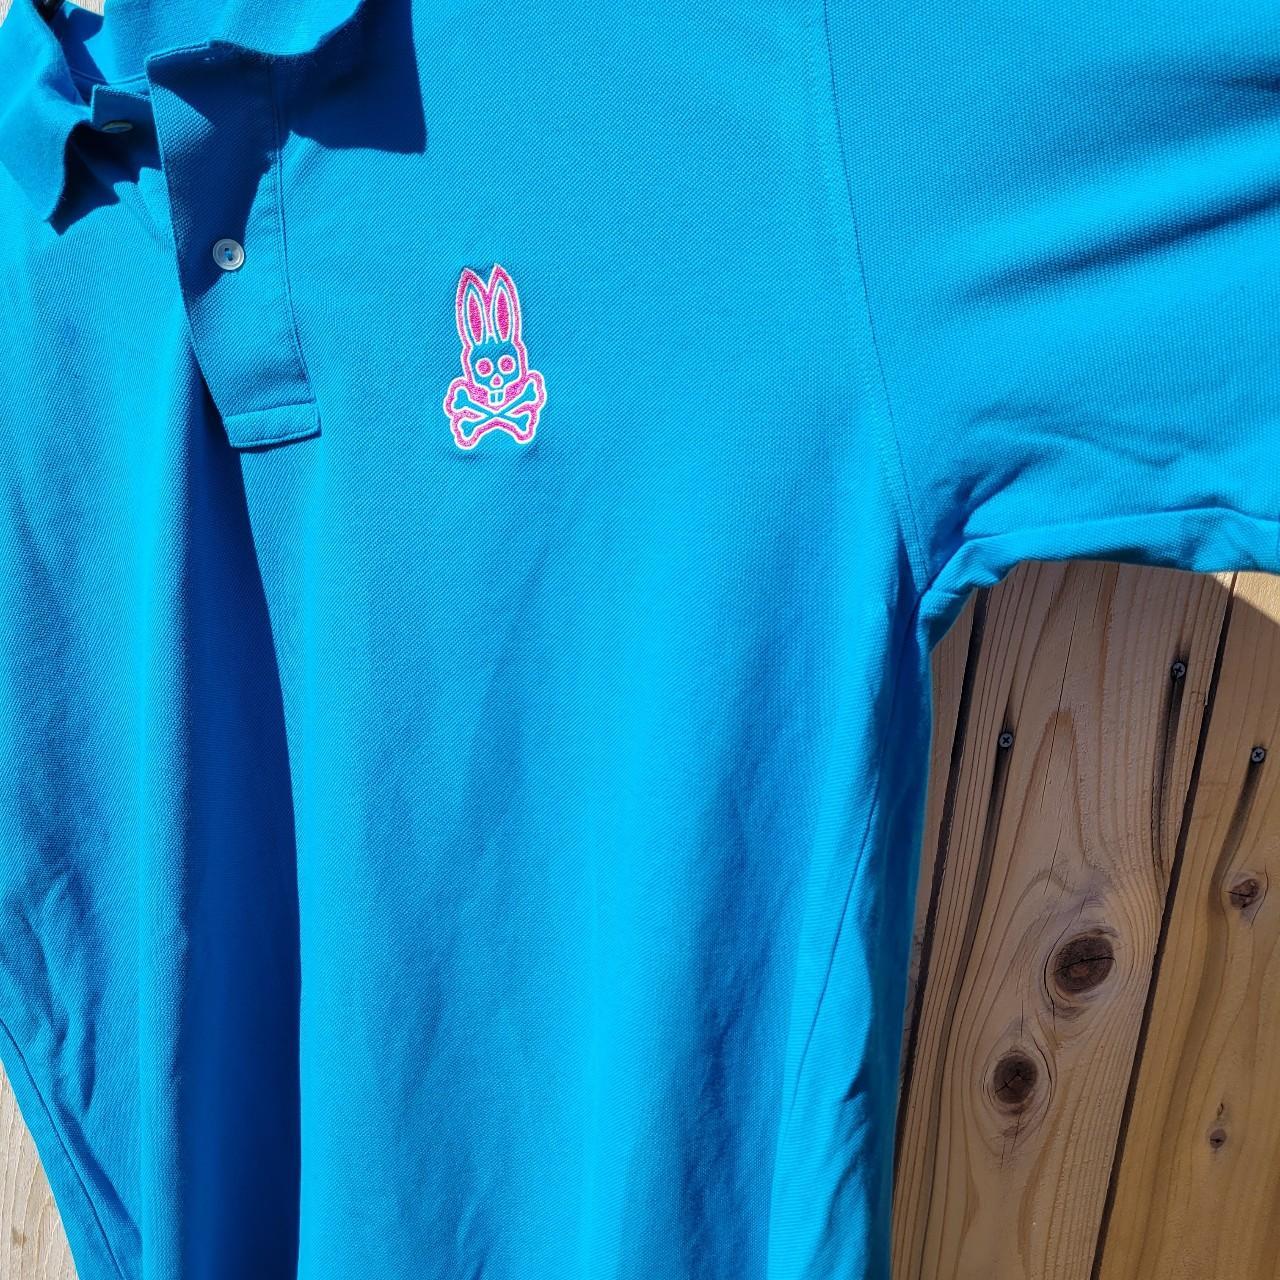 Psycho Bunny Men's Blue and Pink Polo-shirts (3)